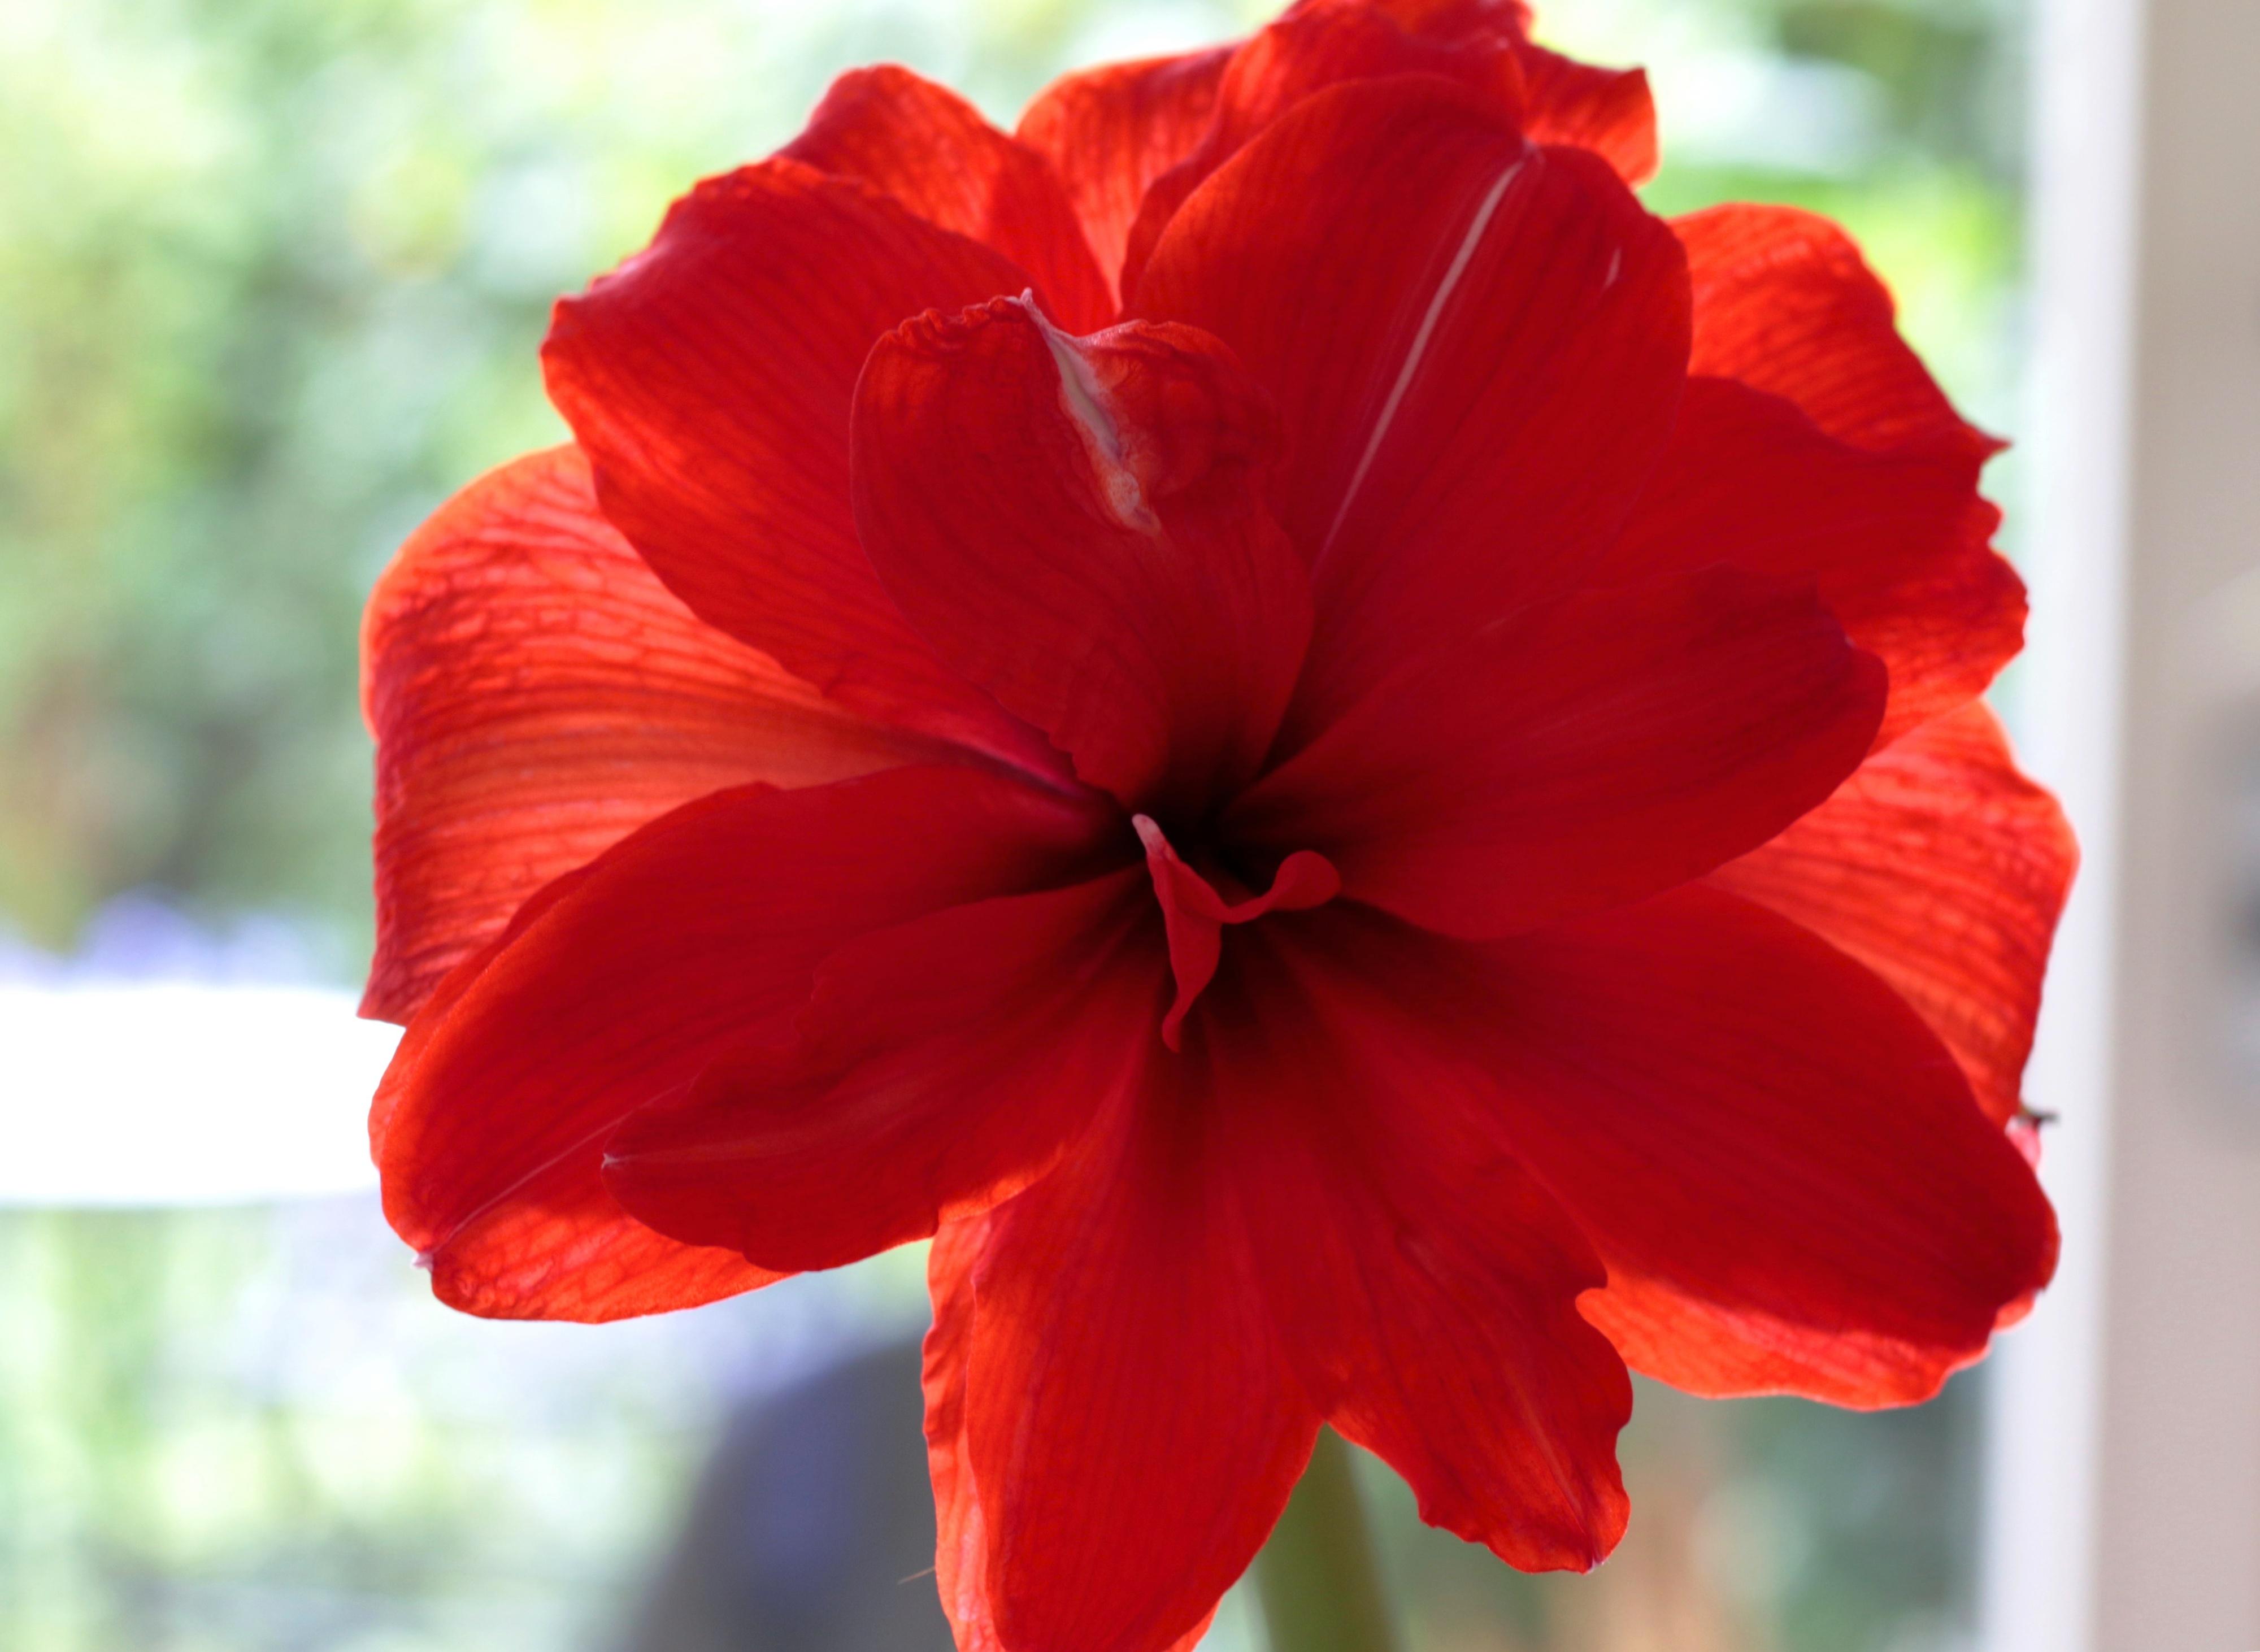 Hippeastrum Southern Hemisphere 'Double King' - Christmas Forcing Amaryllis from Leo Berbee Bulb Company